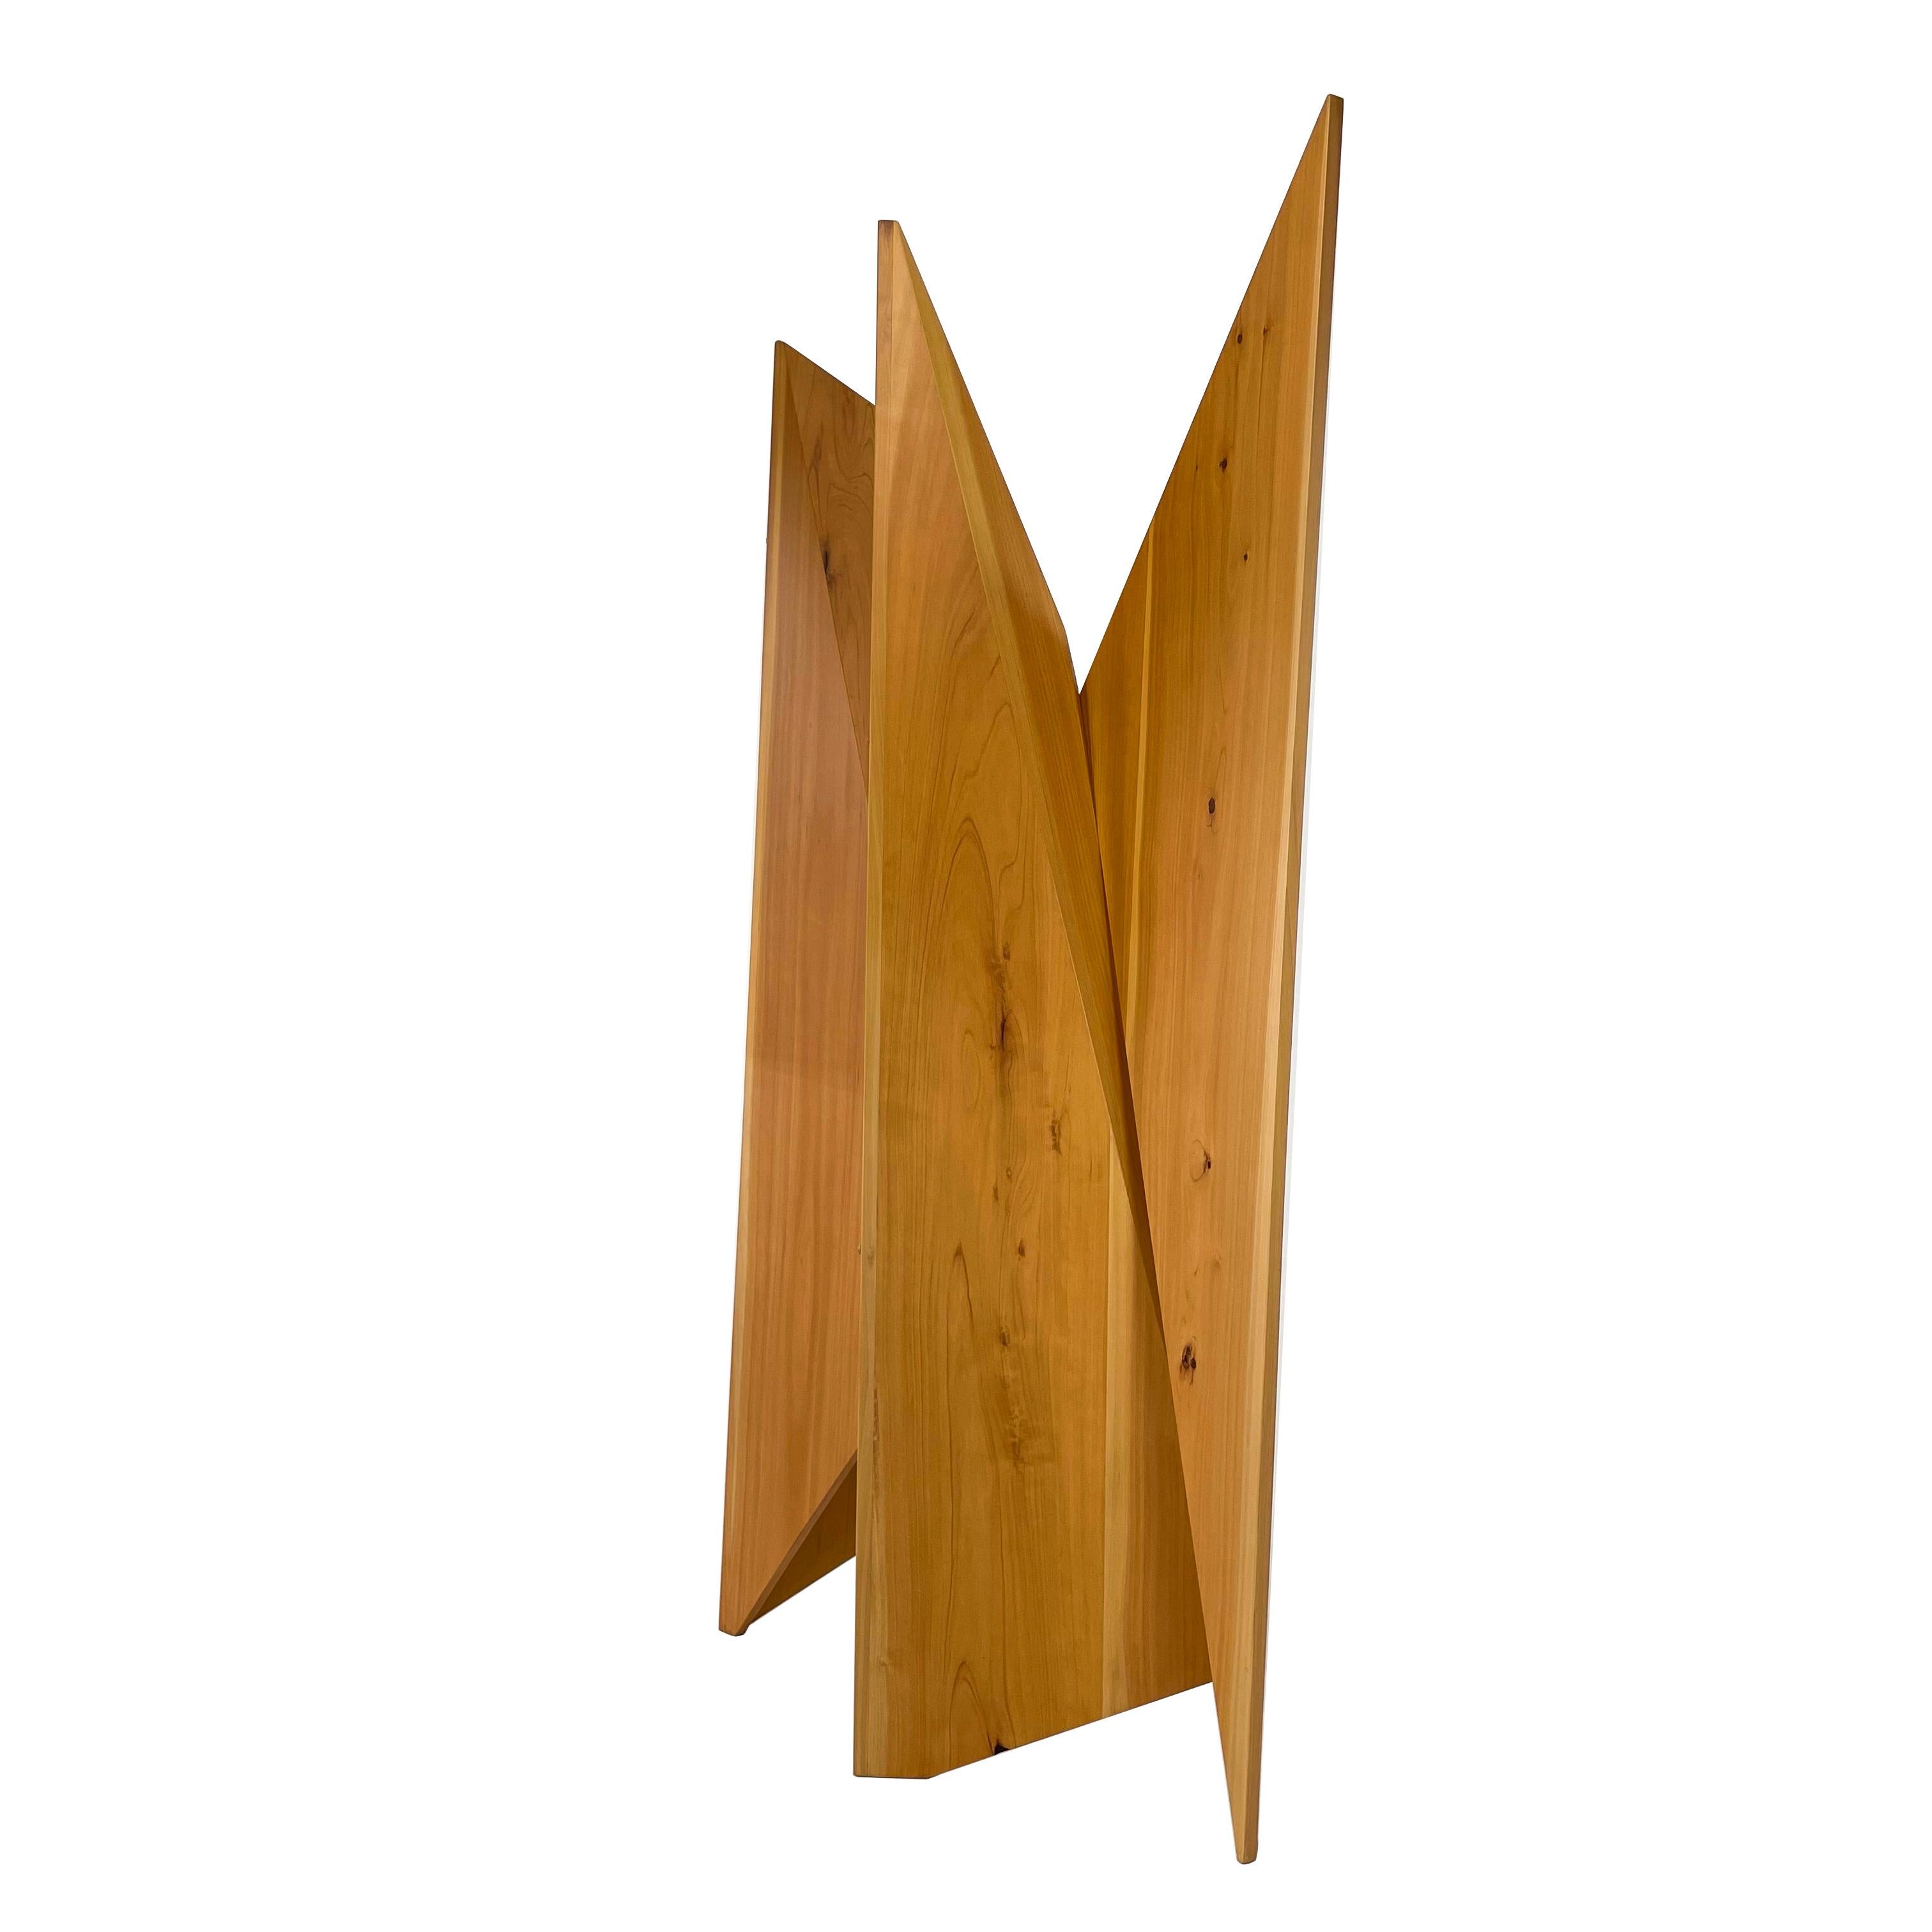 Hand-Crafted Modern Wood Sculpture Wall Screen / Room Divider by Pierre Sarkis For Sale